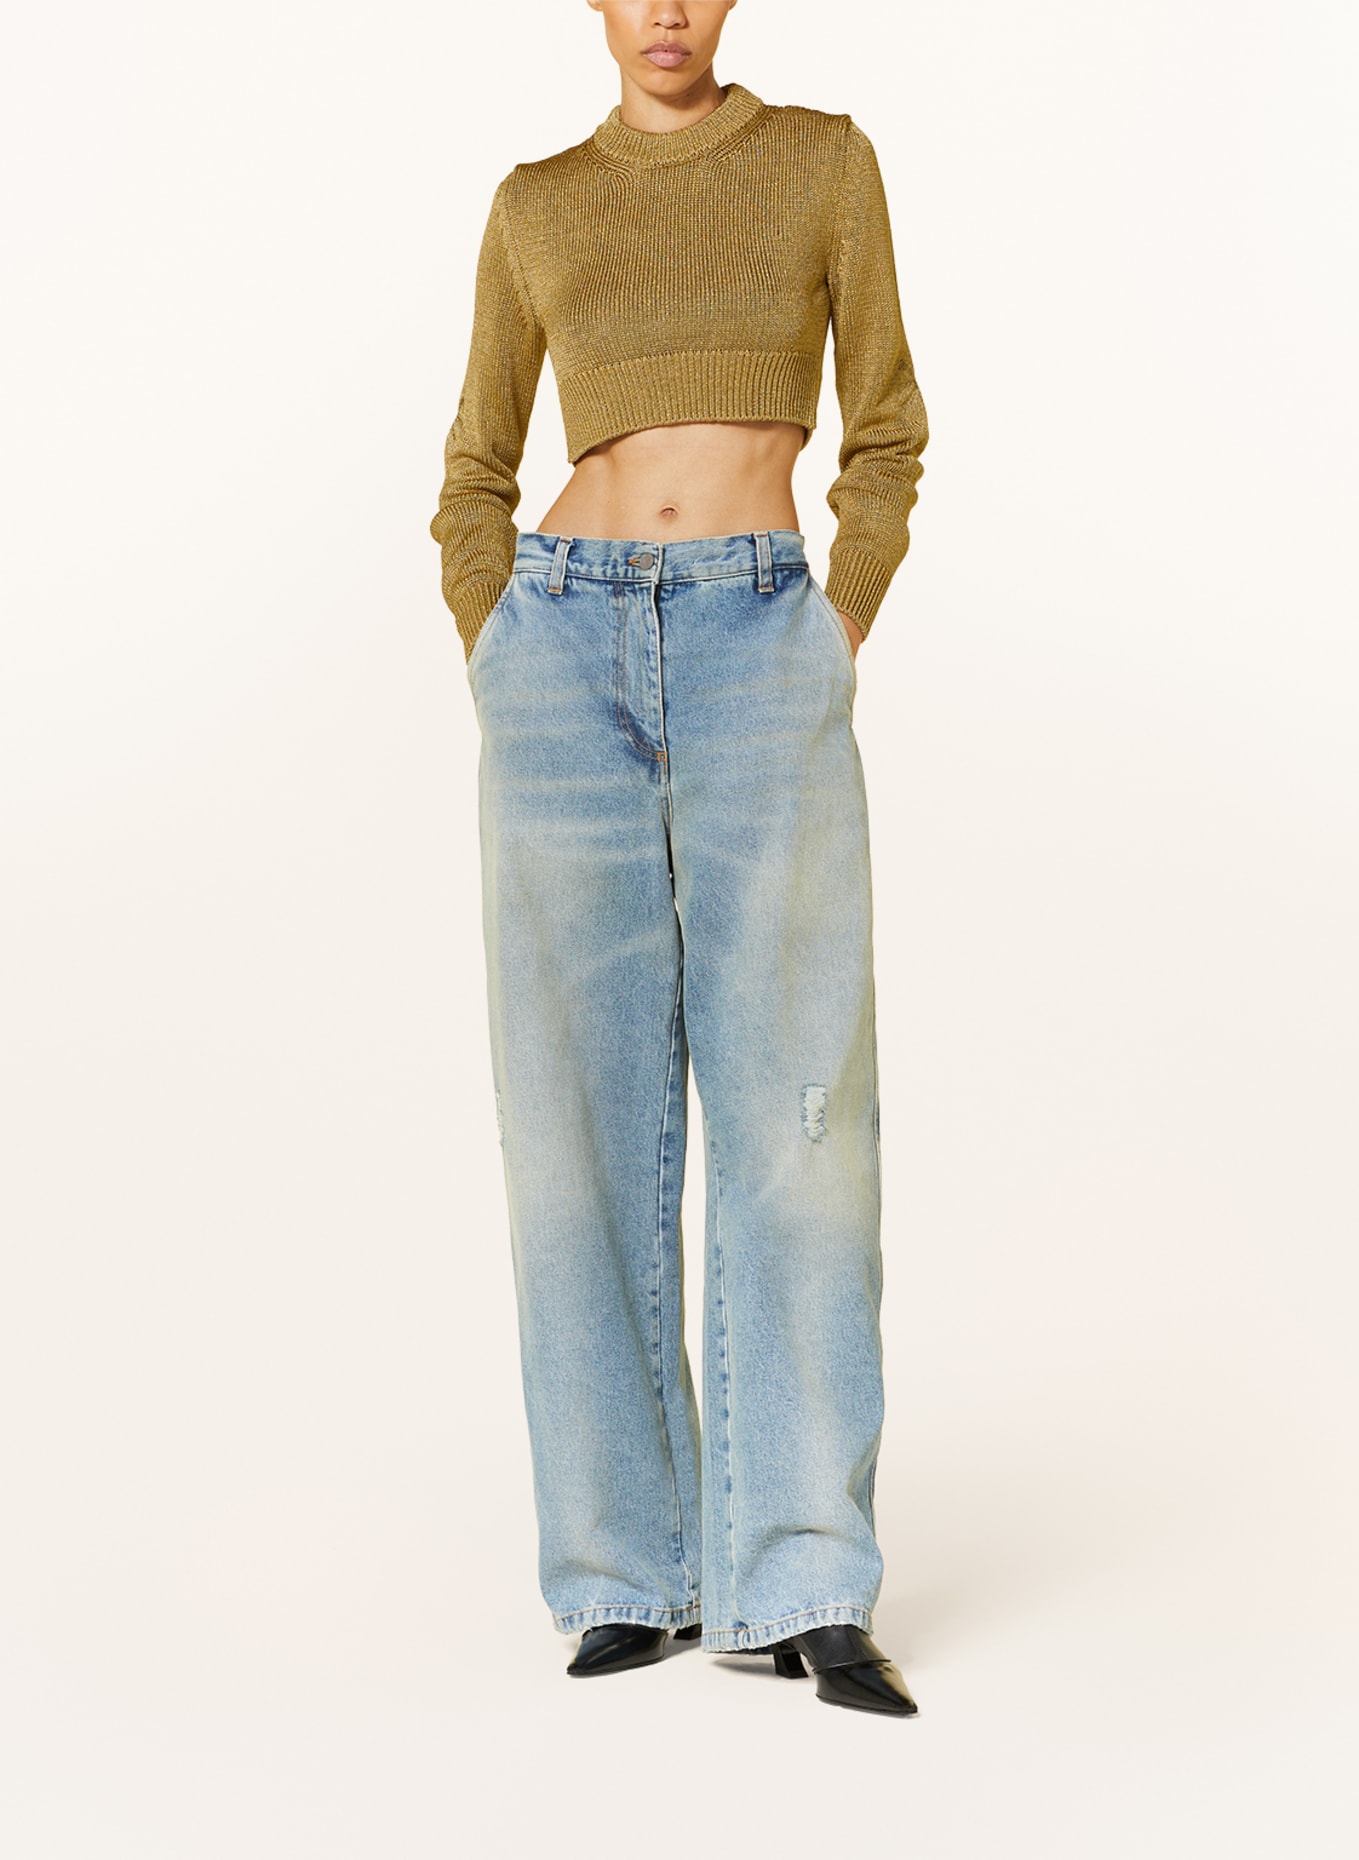 Palm Angels Cropped-Pullover, Farbe: GOLD (Bild 2)